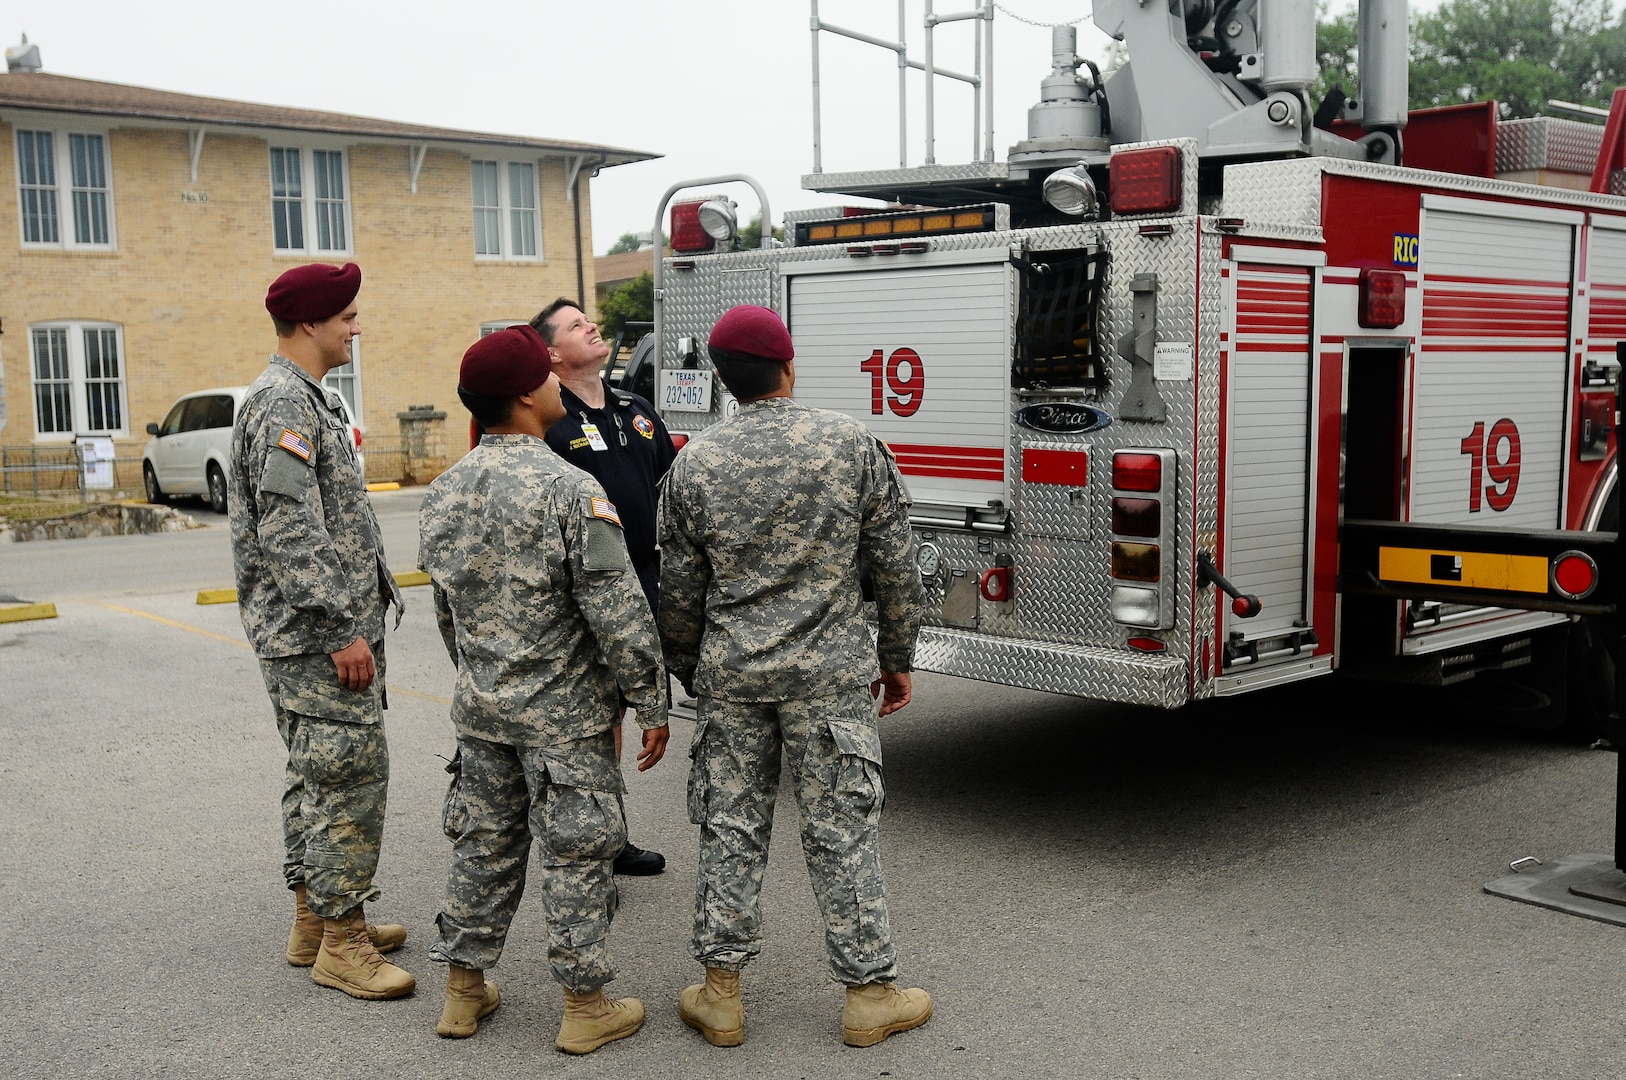 A firefighter with the Austin Fire Department shows his fire truck to U.S. Army National Guard Soldiers in the Texas Military Forces Open House at Camp Mabry in Austin, Texas. Civilian first responders set up tables and greeted visitors to share the partnership they have with Texas Military Forces with the public. 